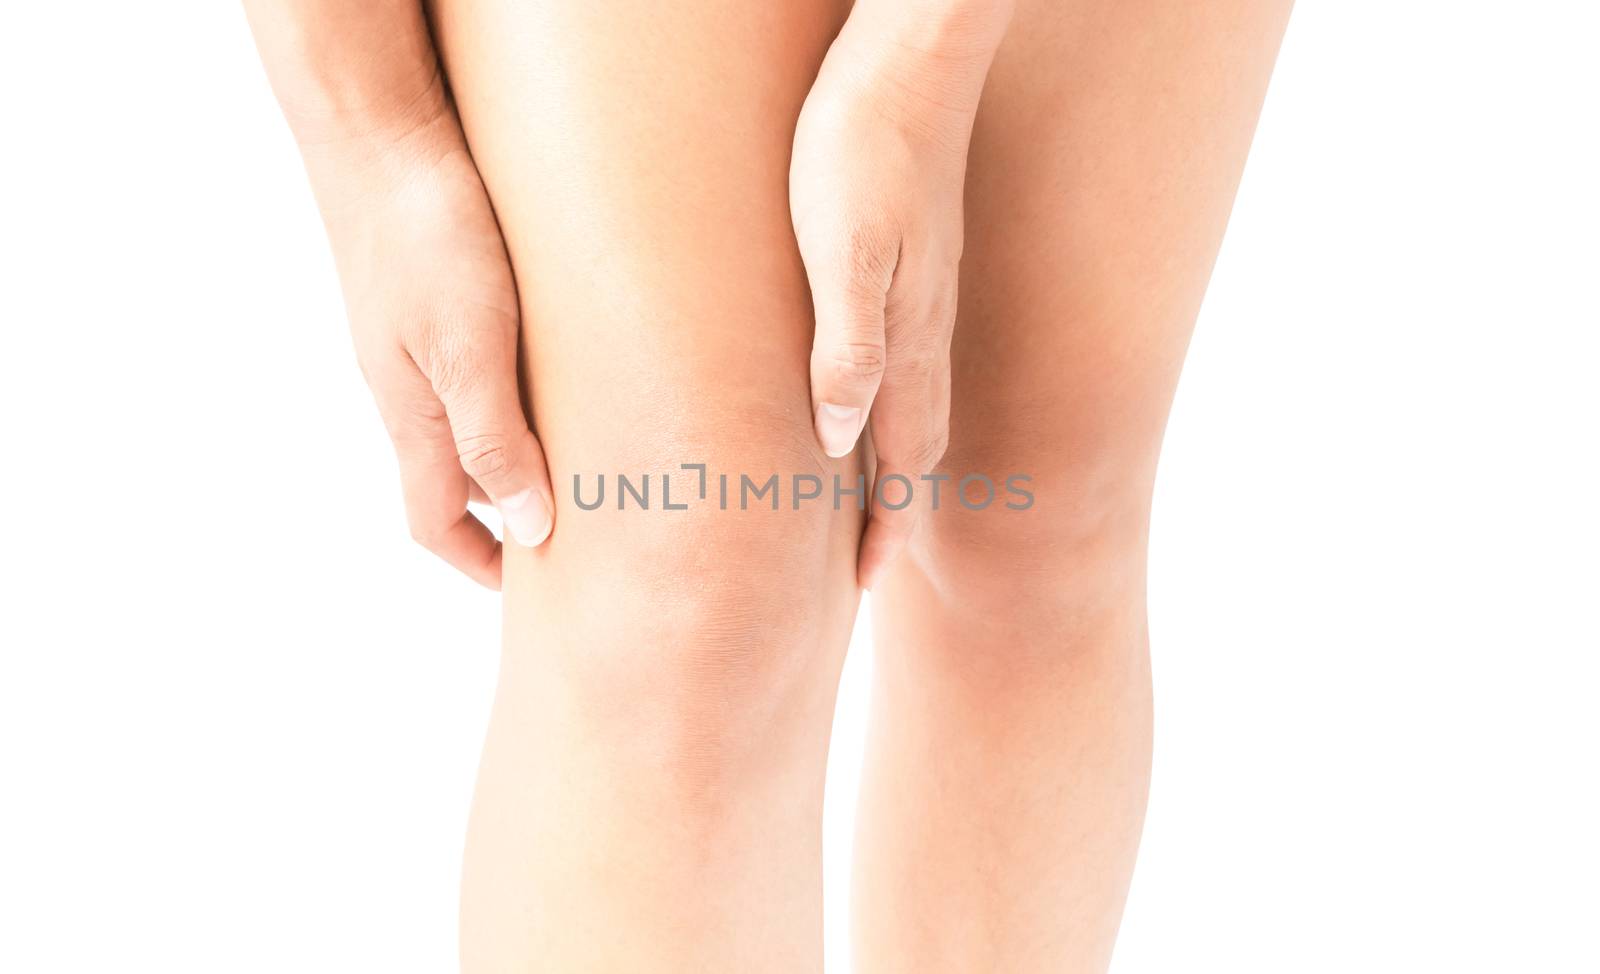 Closeup woman hand hold knee with pain symptom, health care and medicine concept